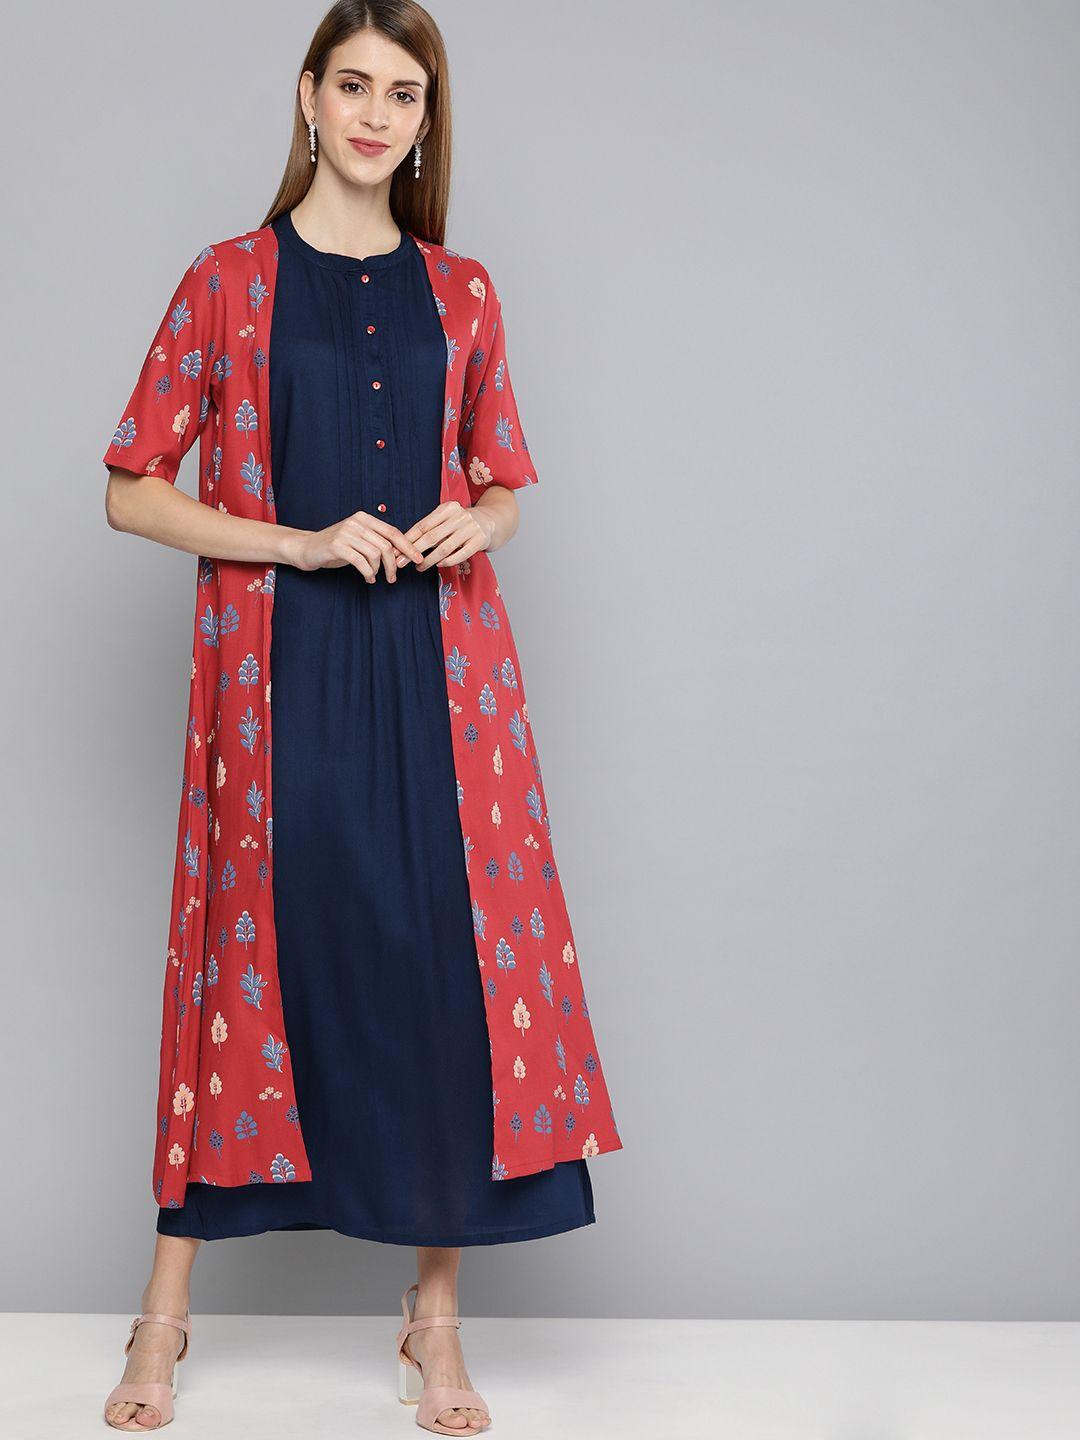 here&now women navy blue solid maxi layered dress with jacket